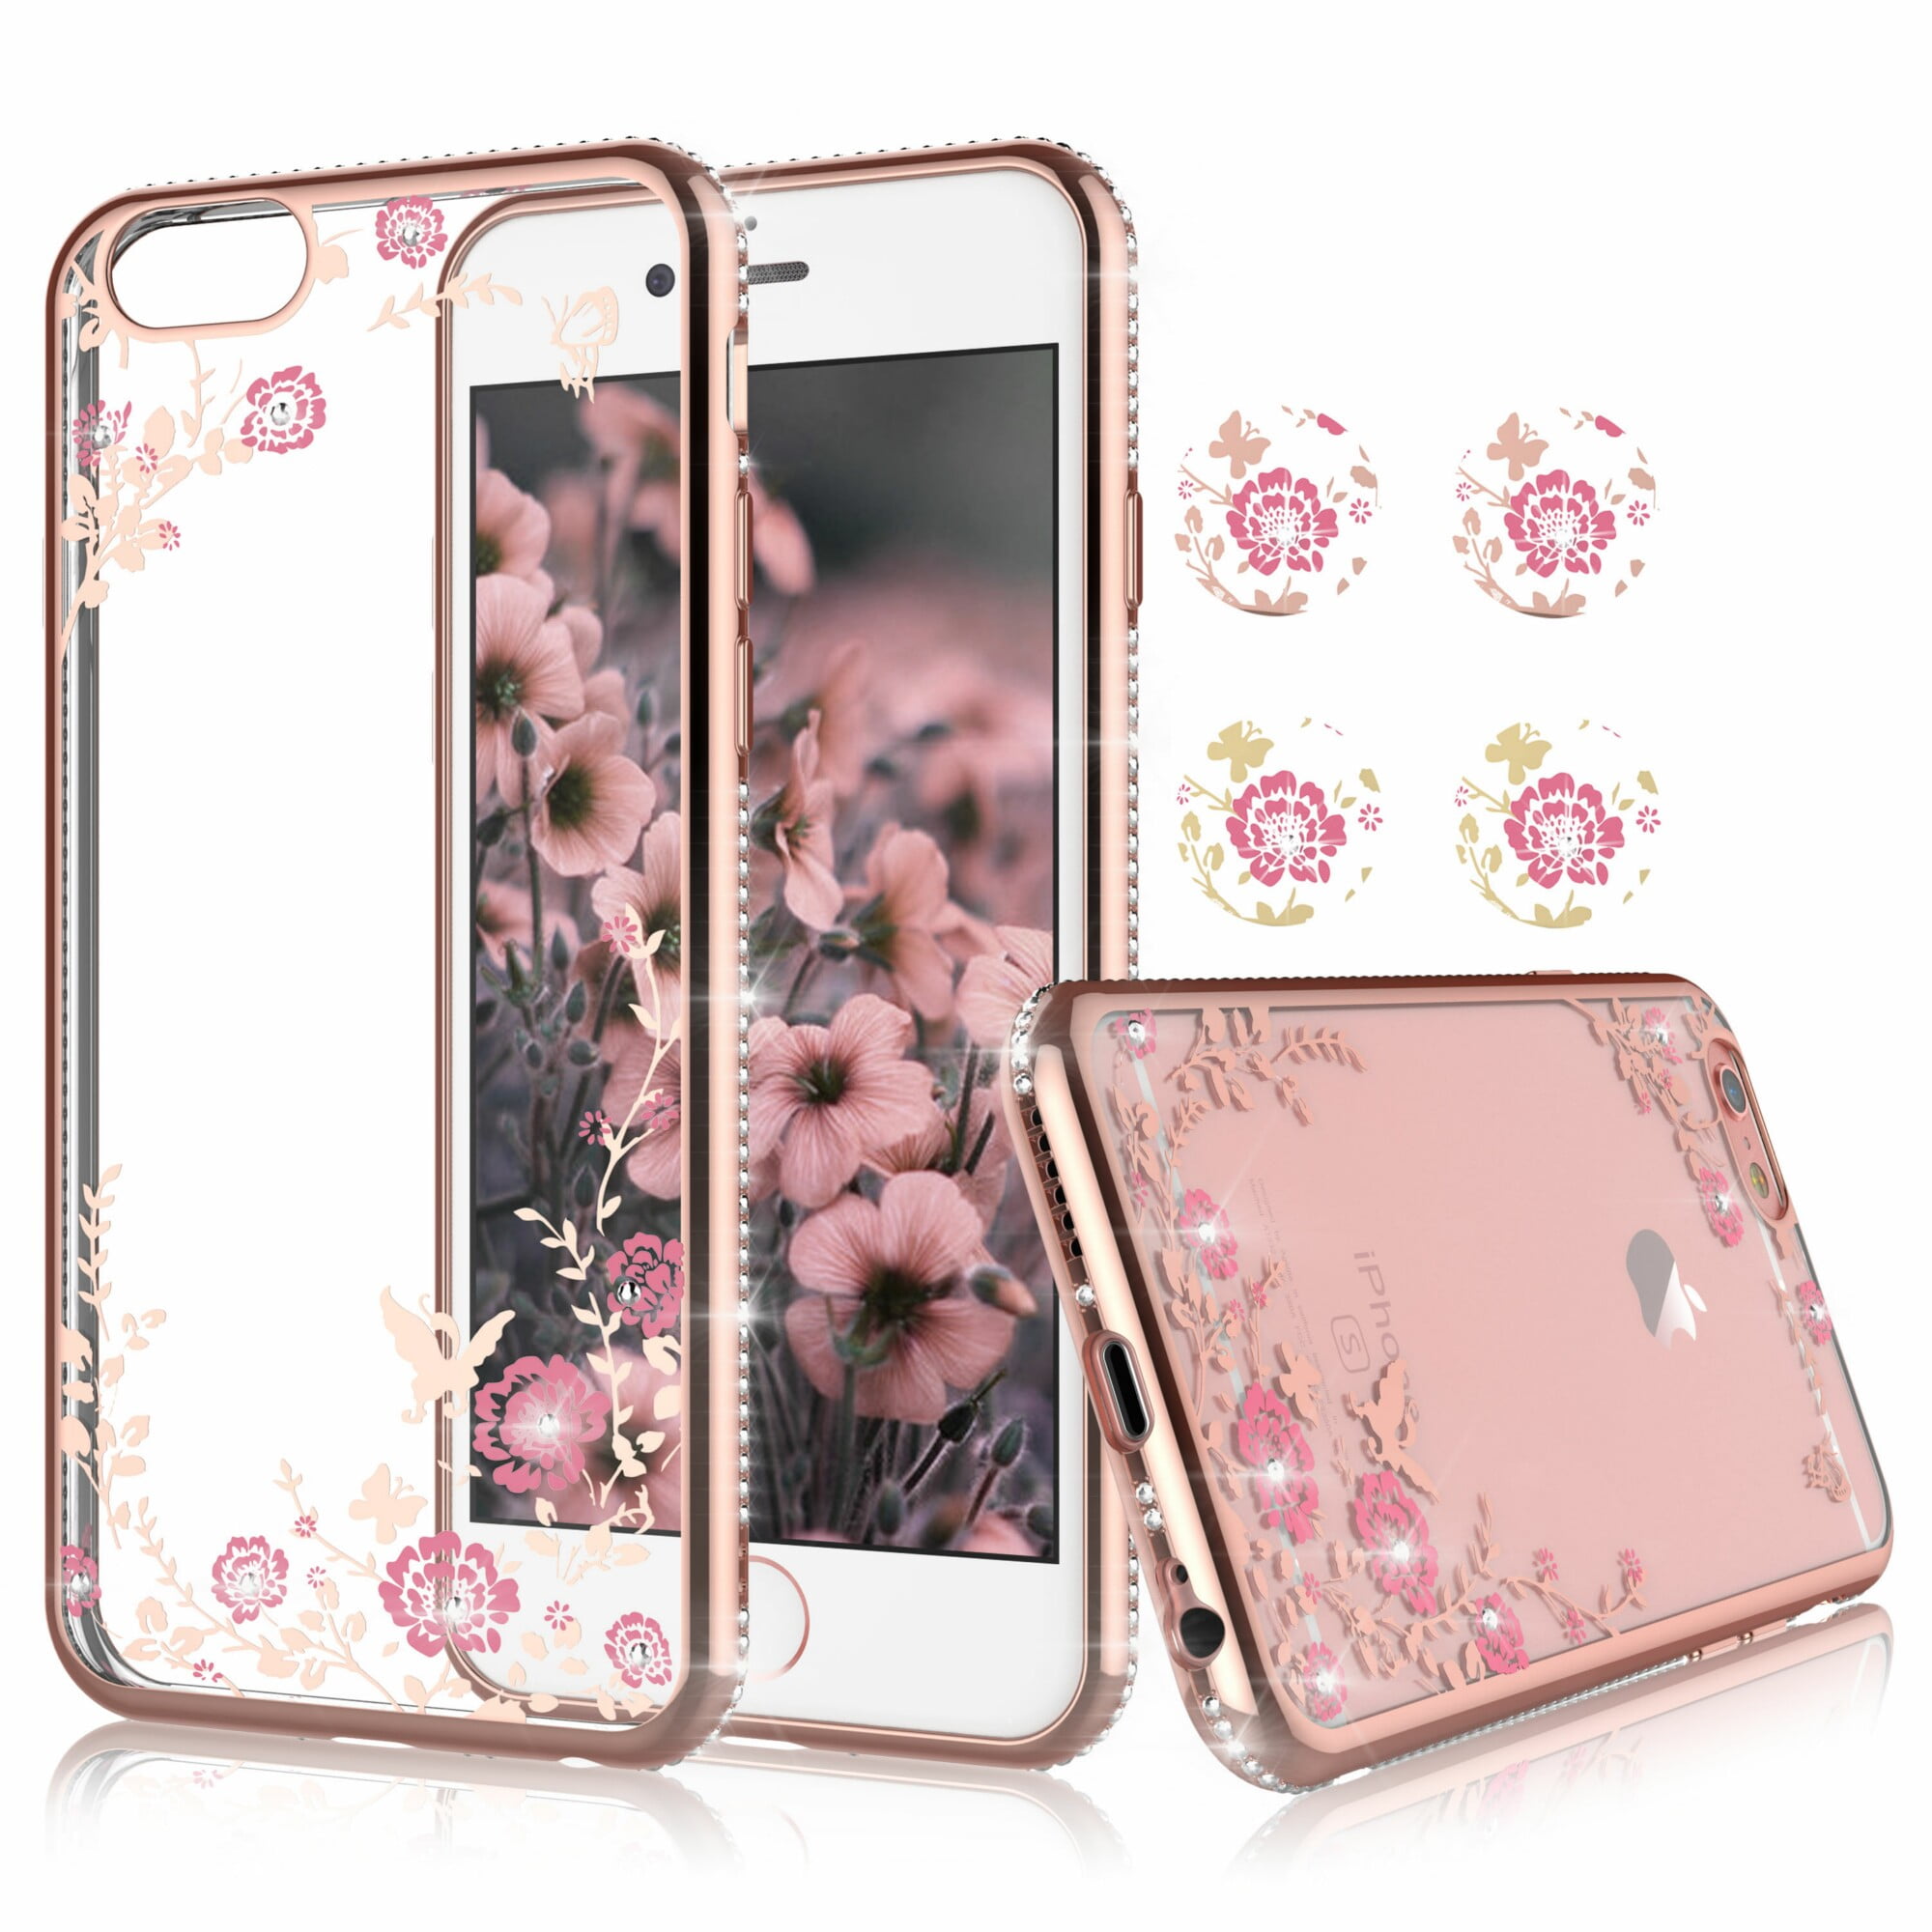 Iphone 6 Plus Case Iphone 6s Plus Clear Case Iphone 6s Plus Cover Njjex Ultra Thin Tpu Soft Case With Bling Diamond Cover For Apple Iphone 6 Plus Iphone 6s Plus